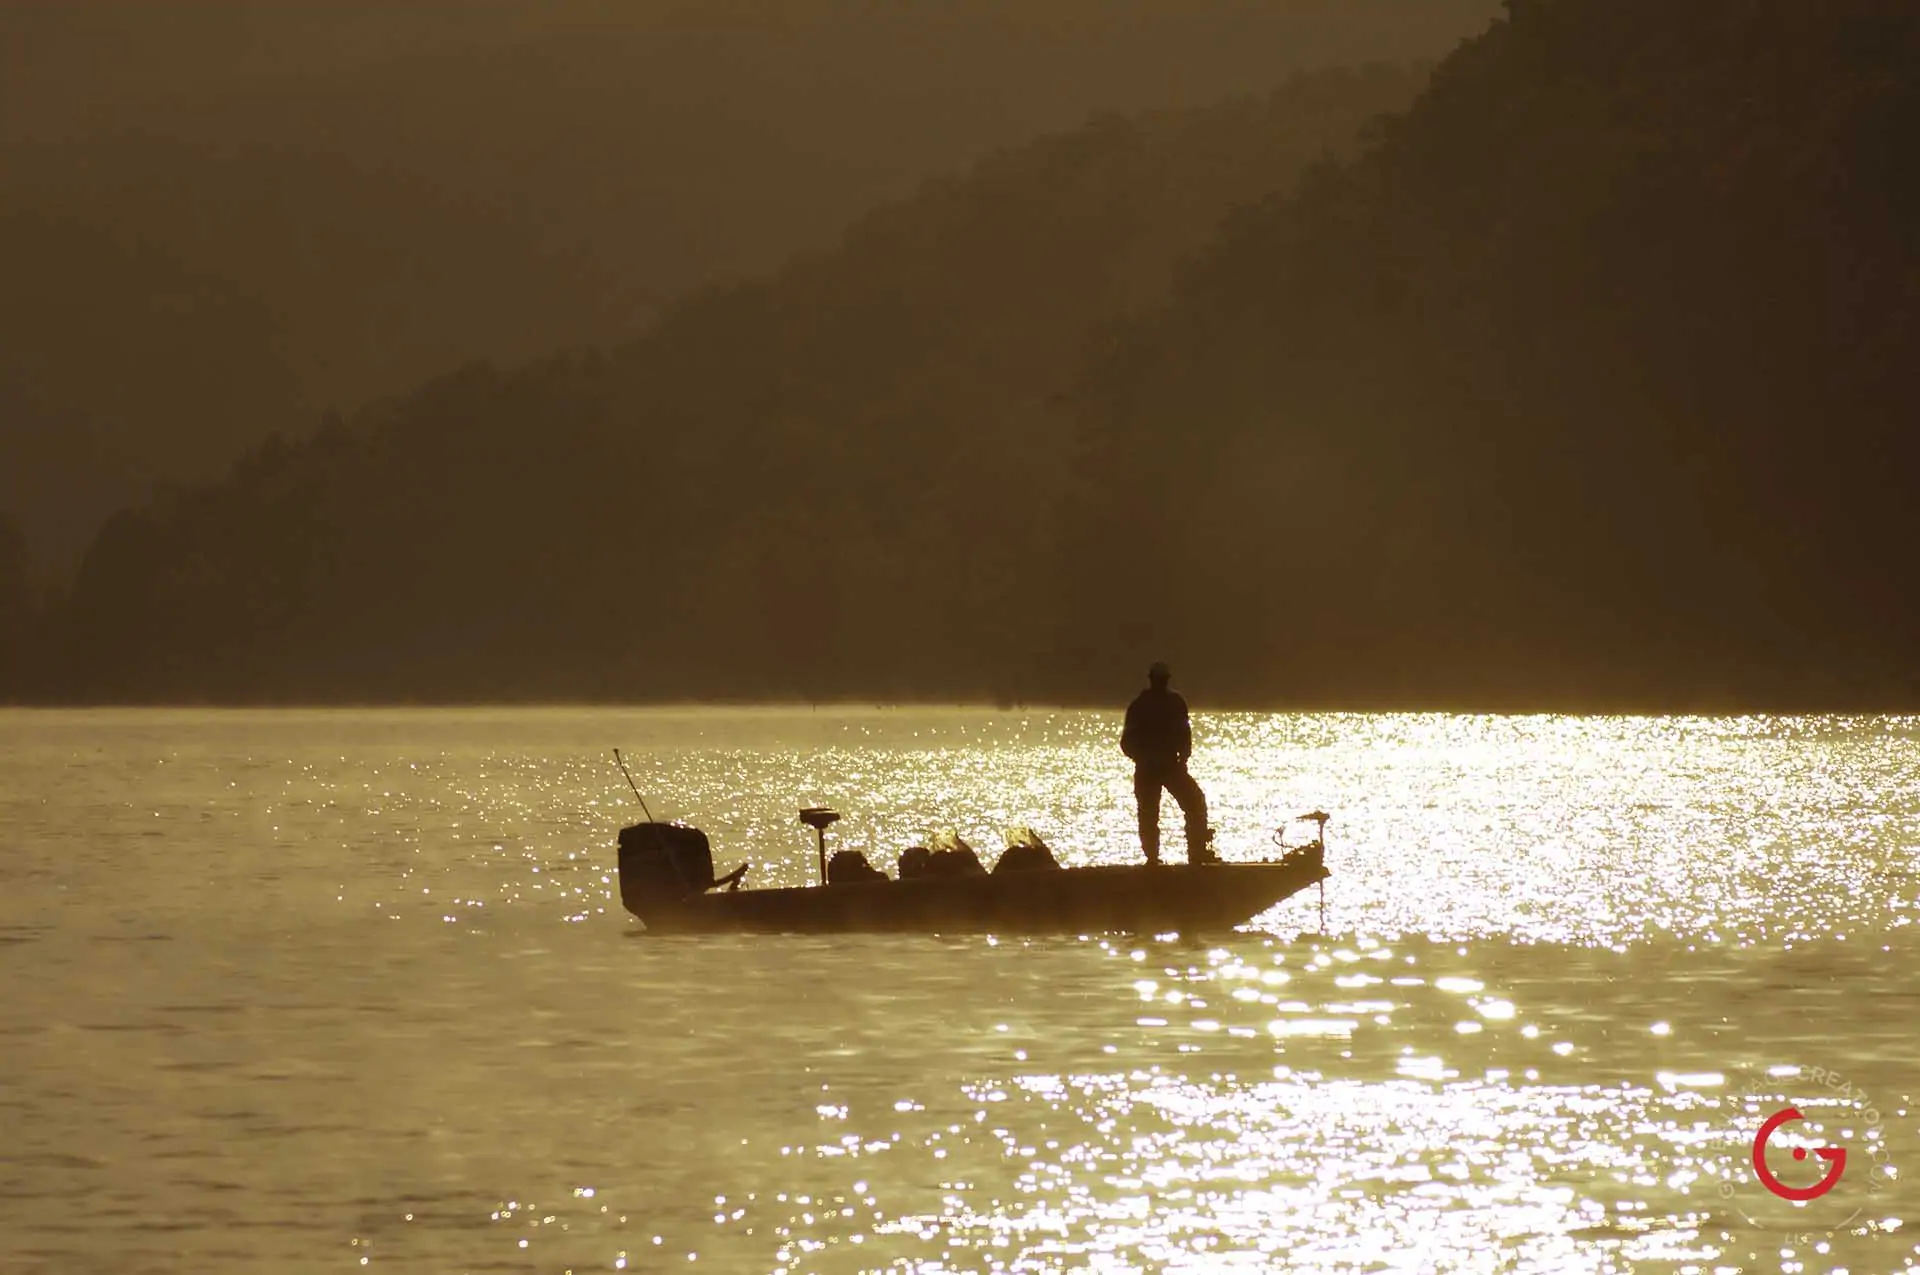 A man fishing boat in Table Rock Lake in the morning mist. Golden sunlight glistens on the water. - Advertising photographers in Branson Missouri, Branson Missouri photography